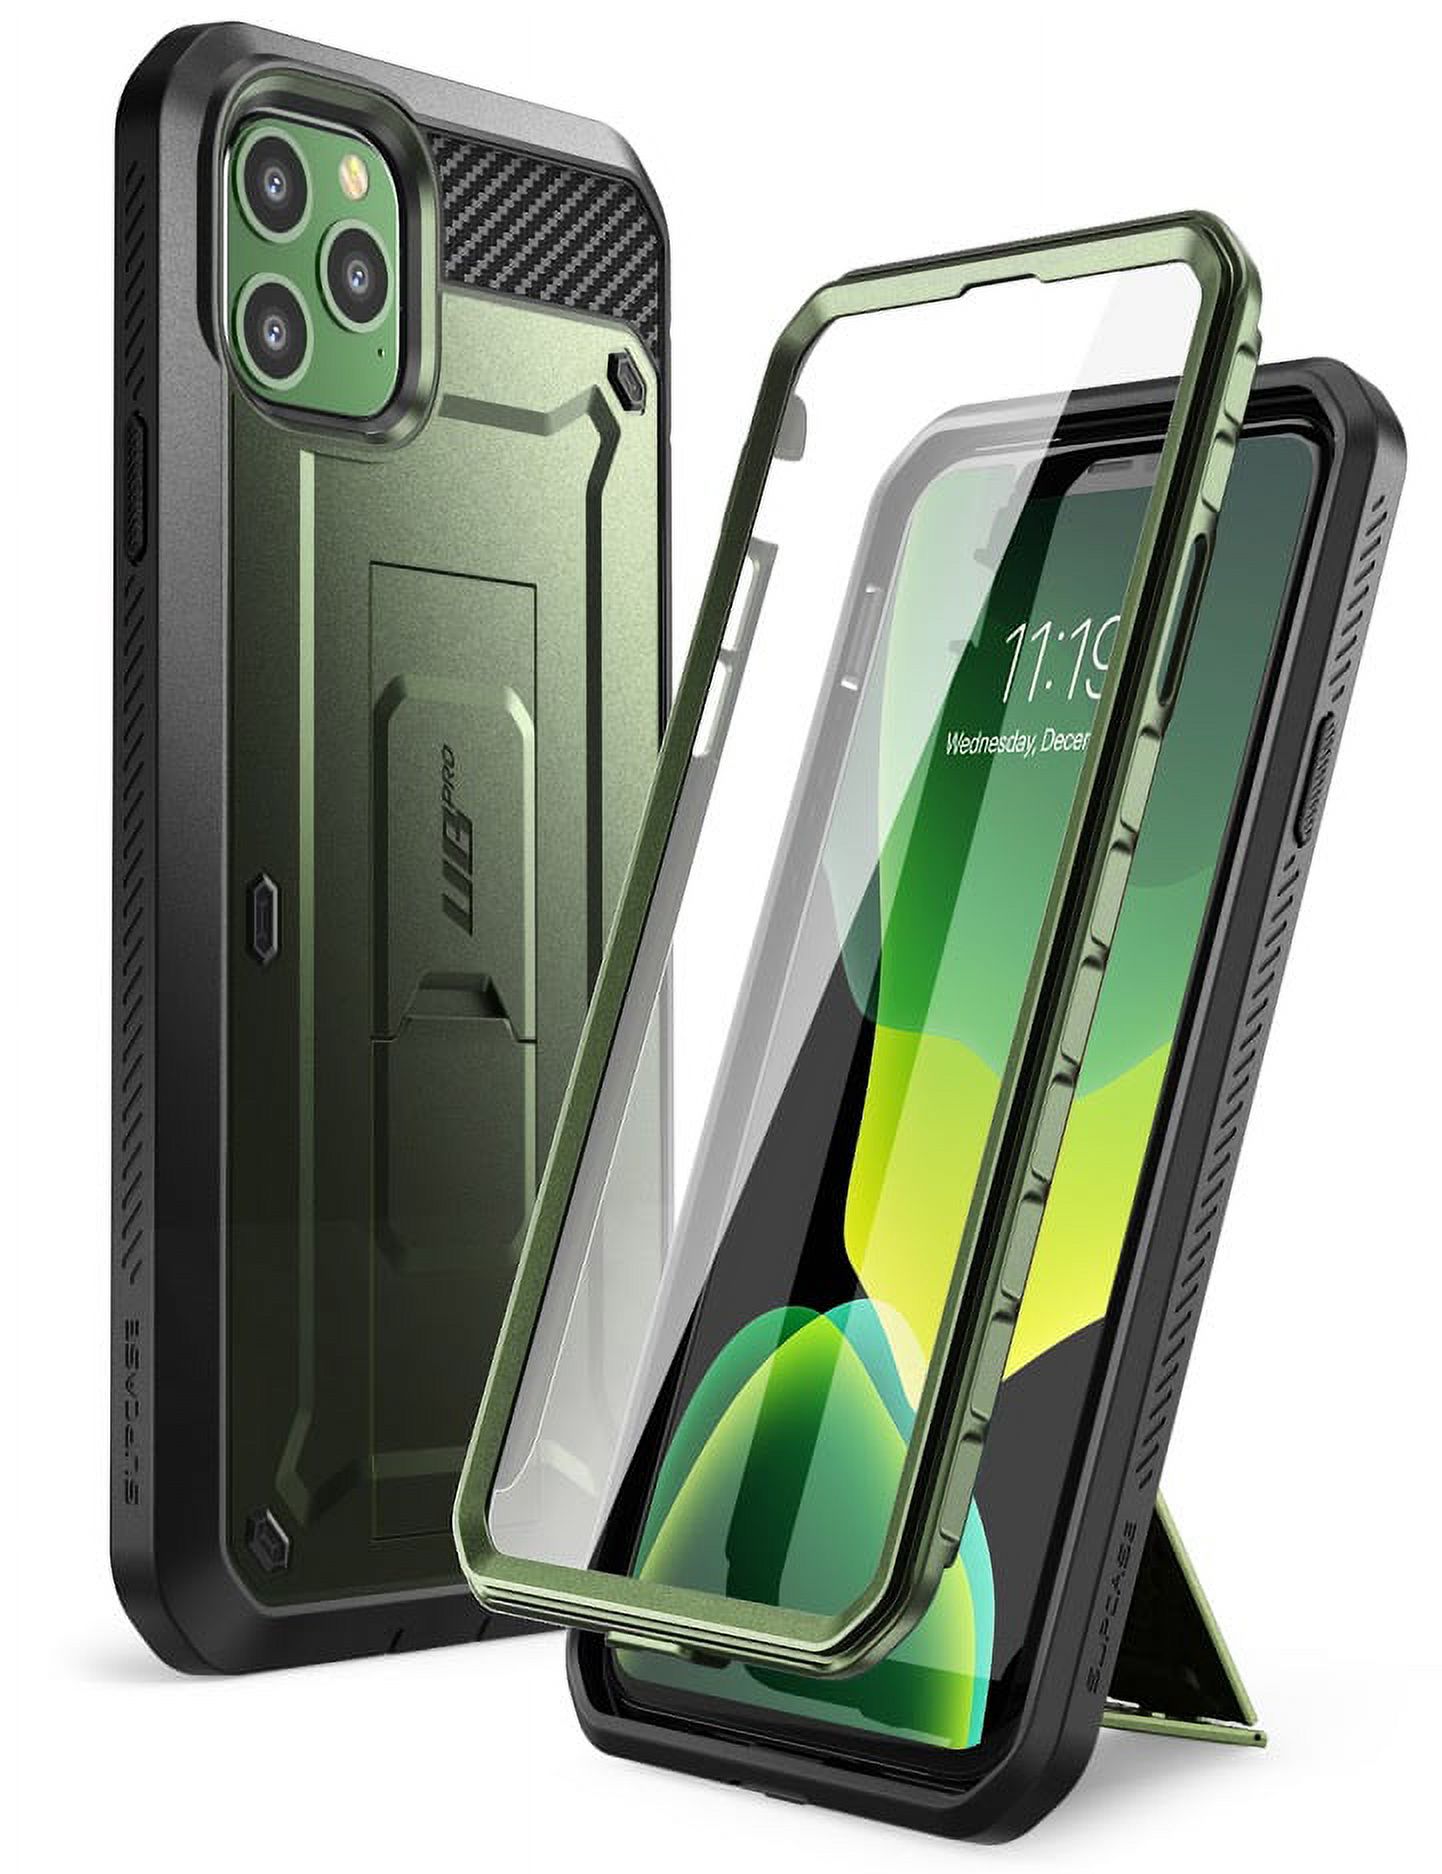 SUPCASE Unicorn Beetle Pro Series Case Designed for iPhone 11 Pro 5.8 Inch (2019 Release), Built-in Screen Protector Full-Body Rugged Holster Case (MetallicGreen) - image 1 of 8